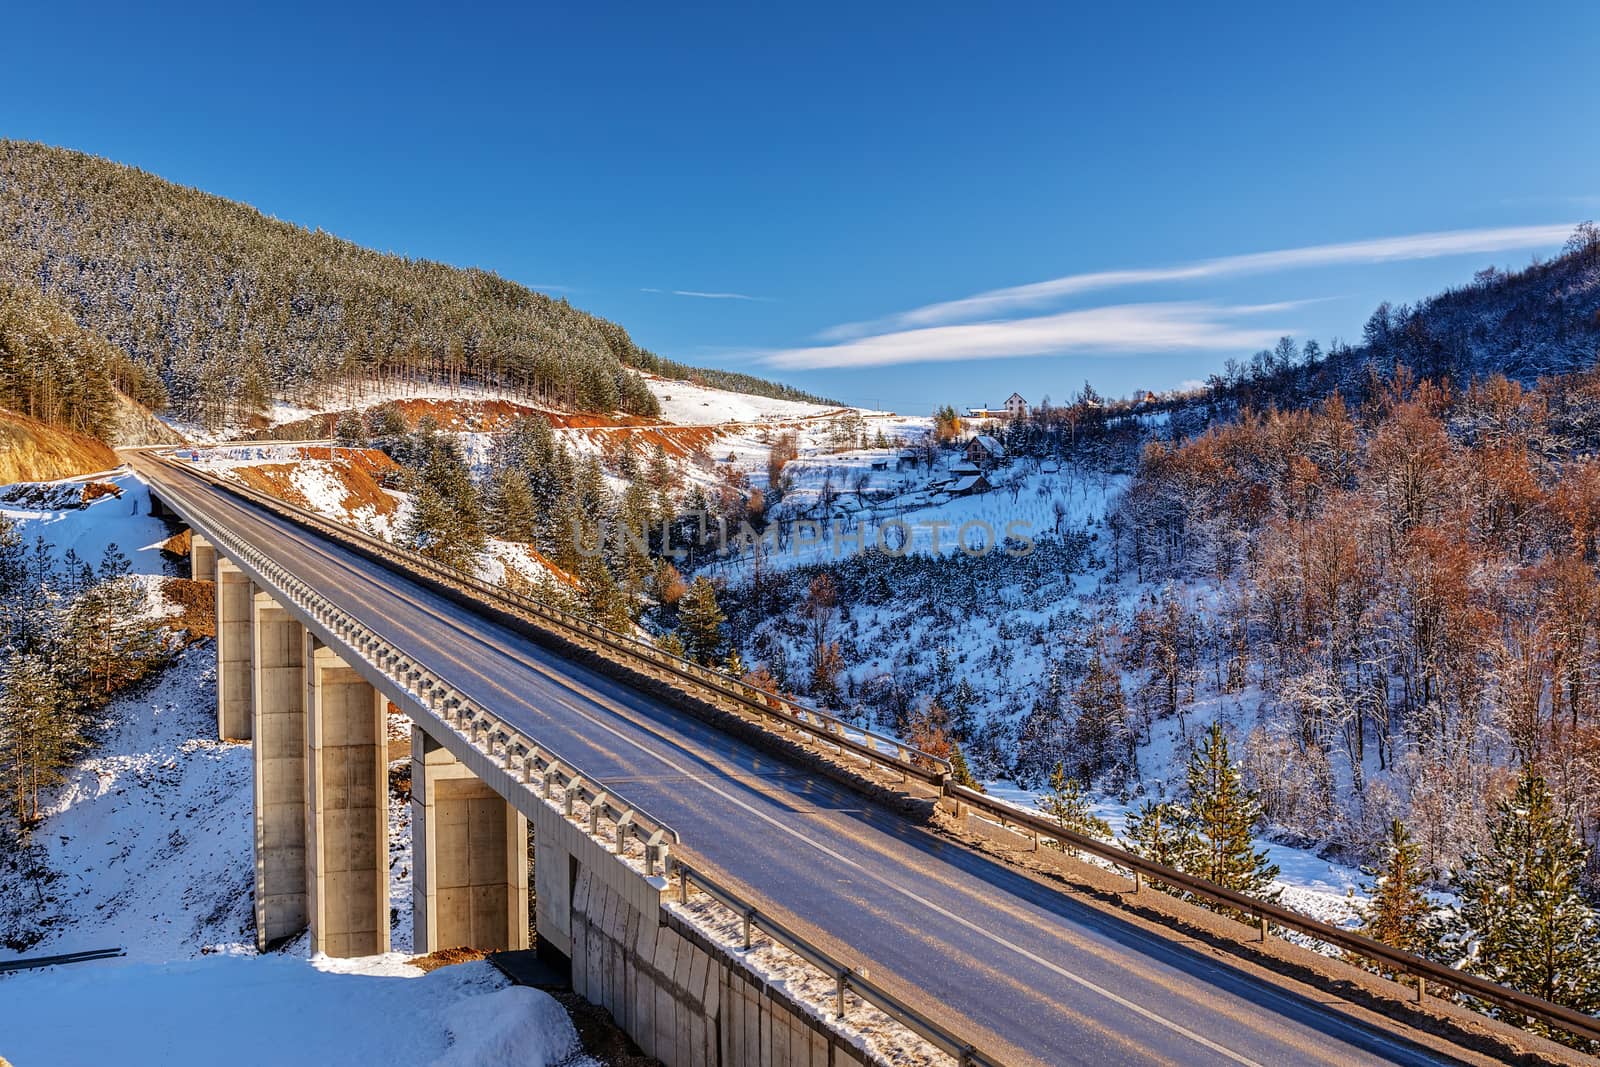 mountain bridge in winter with snow and blue sky by vladimirnenezic